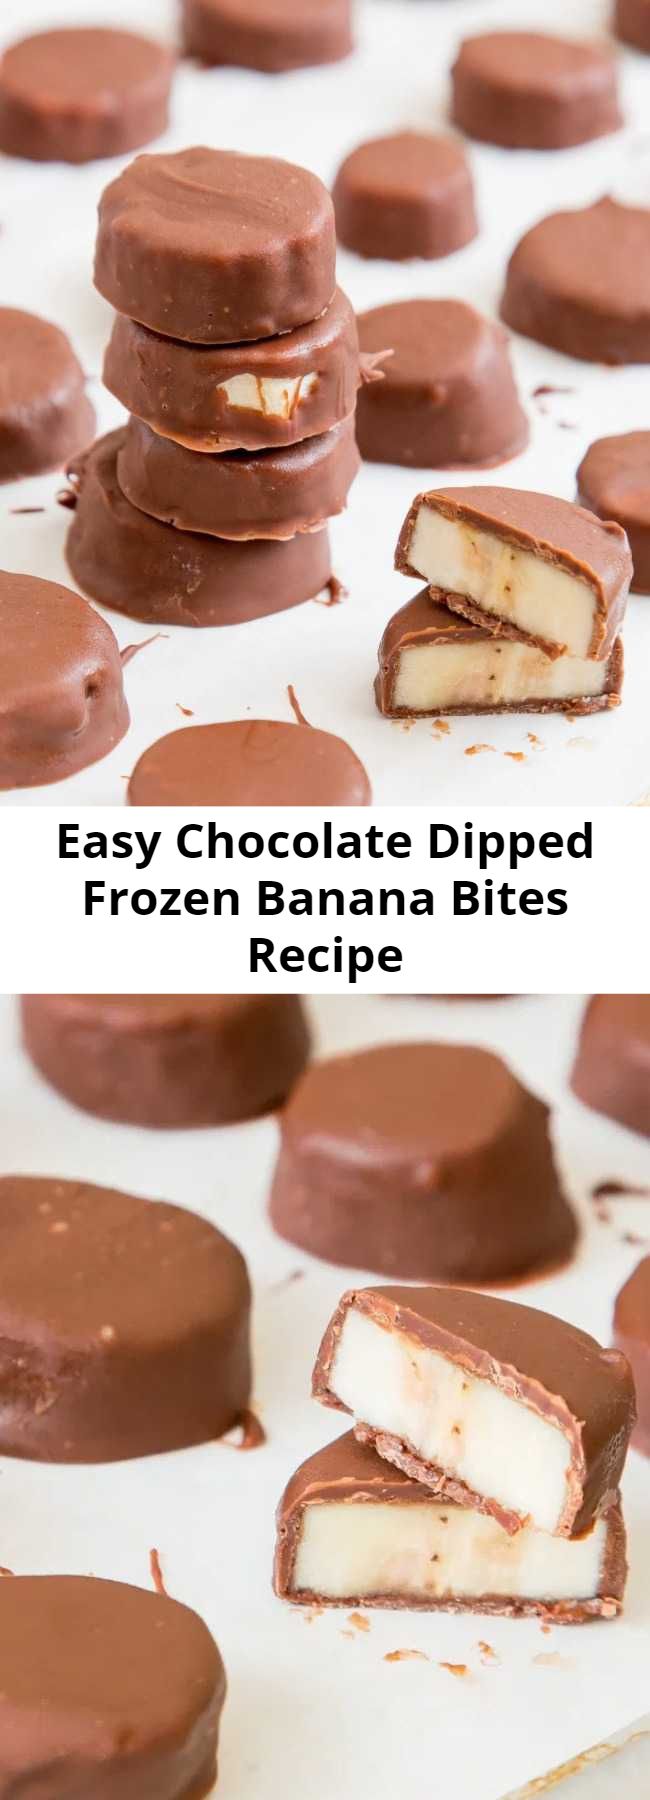 Easy Chocolate Dipped Frozen Banana Bites Recipe - These Chocolate Dipped Frozen Banana Bites are perfect little snacks with just 3 ingredients! So easy and tasty!